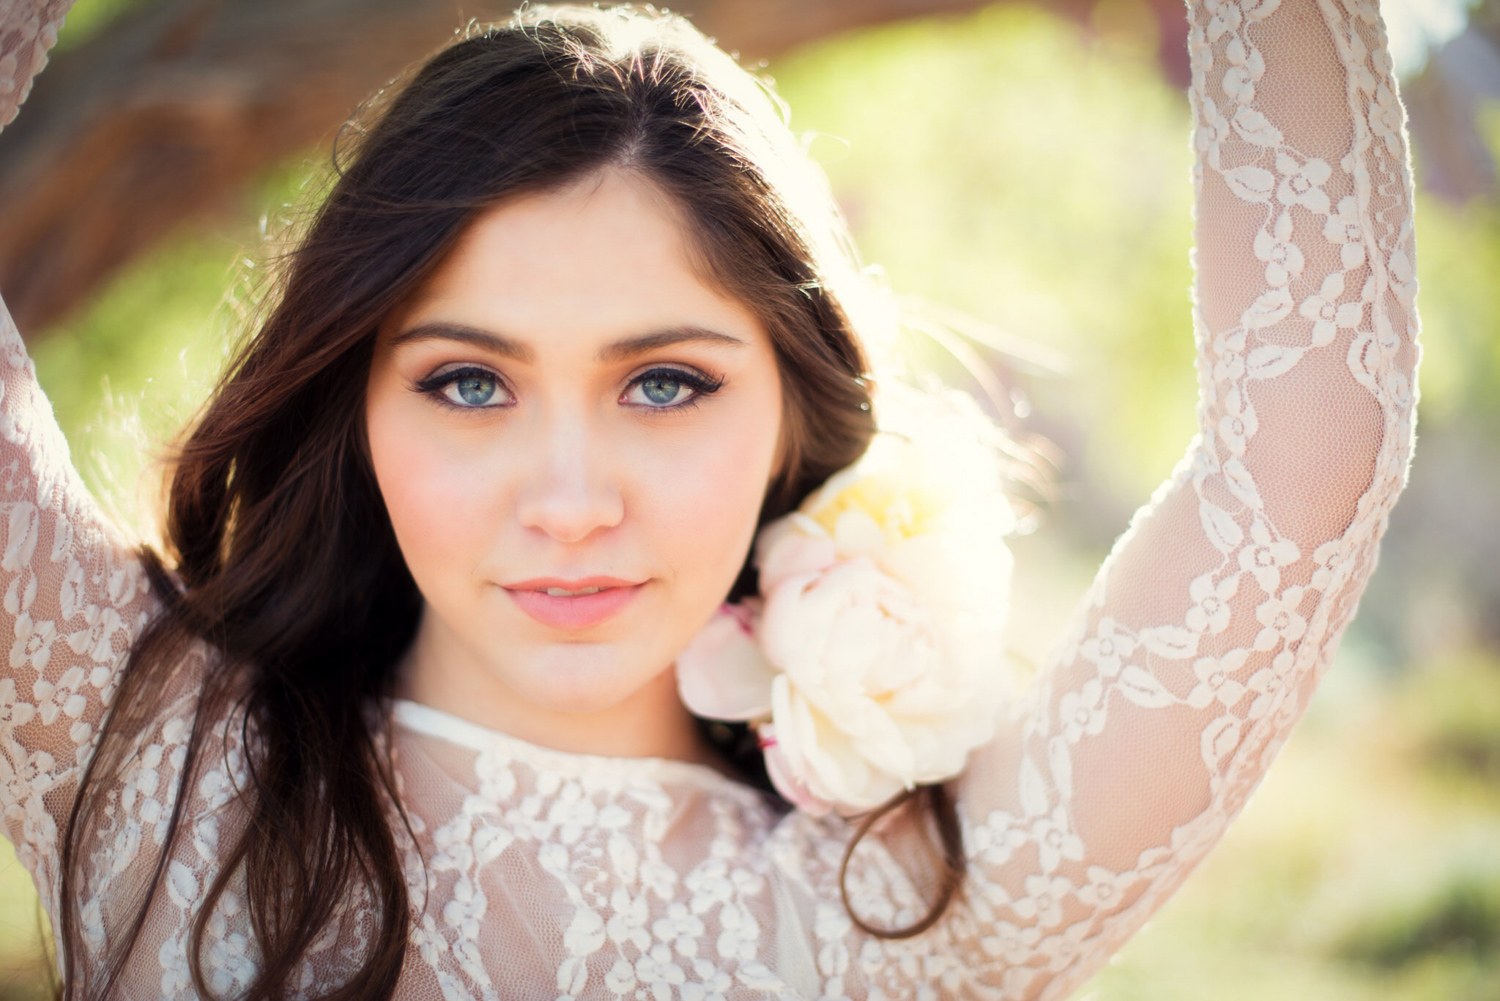 intimate beauty photo with lace top and flowers